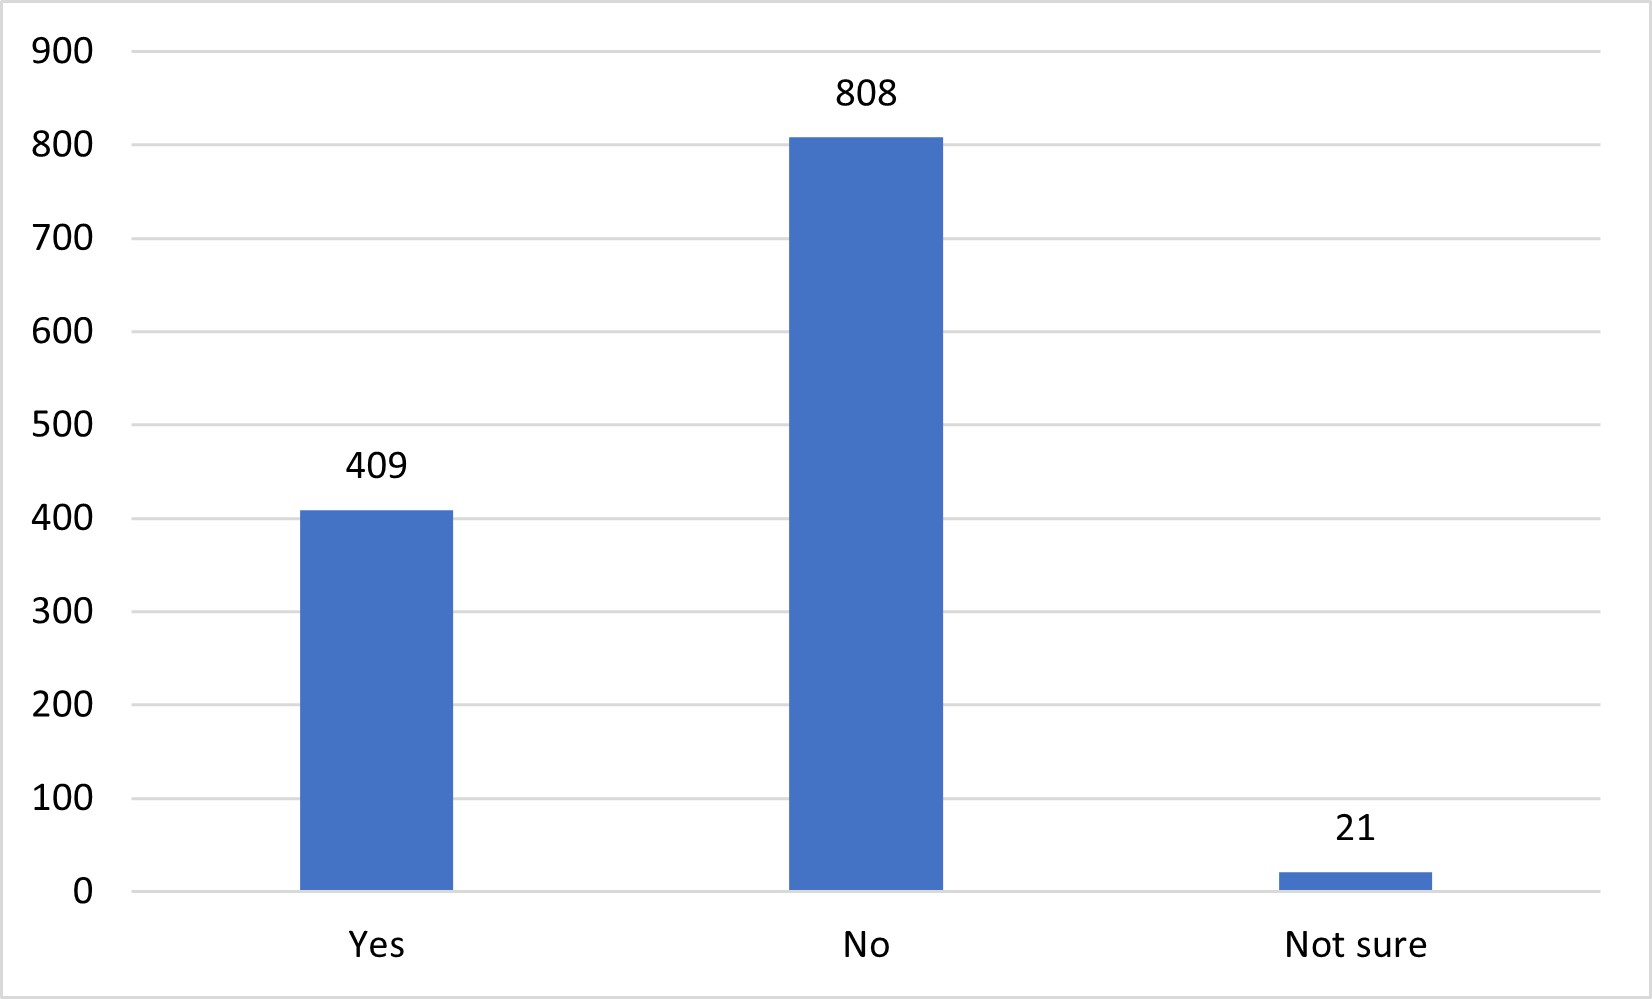 Bar graph showing "No" as the top response to “Have you ever seen anyone double pouch by folding a portion of the inner pouch to fit in the other pouch for sterilization?”